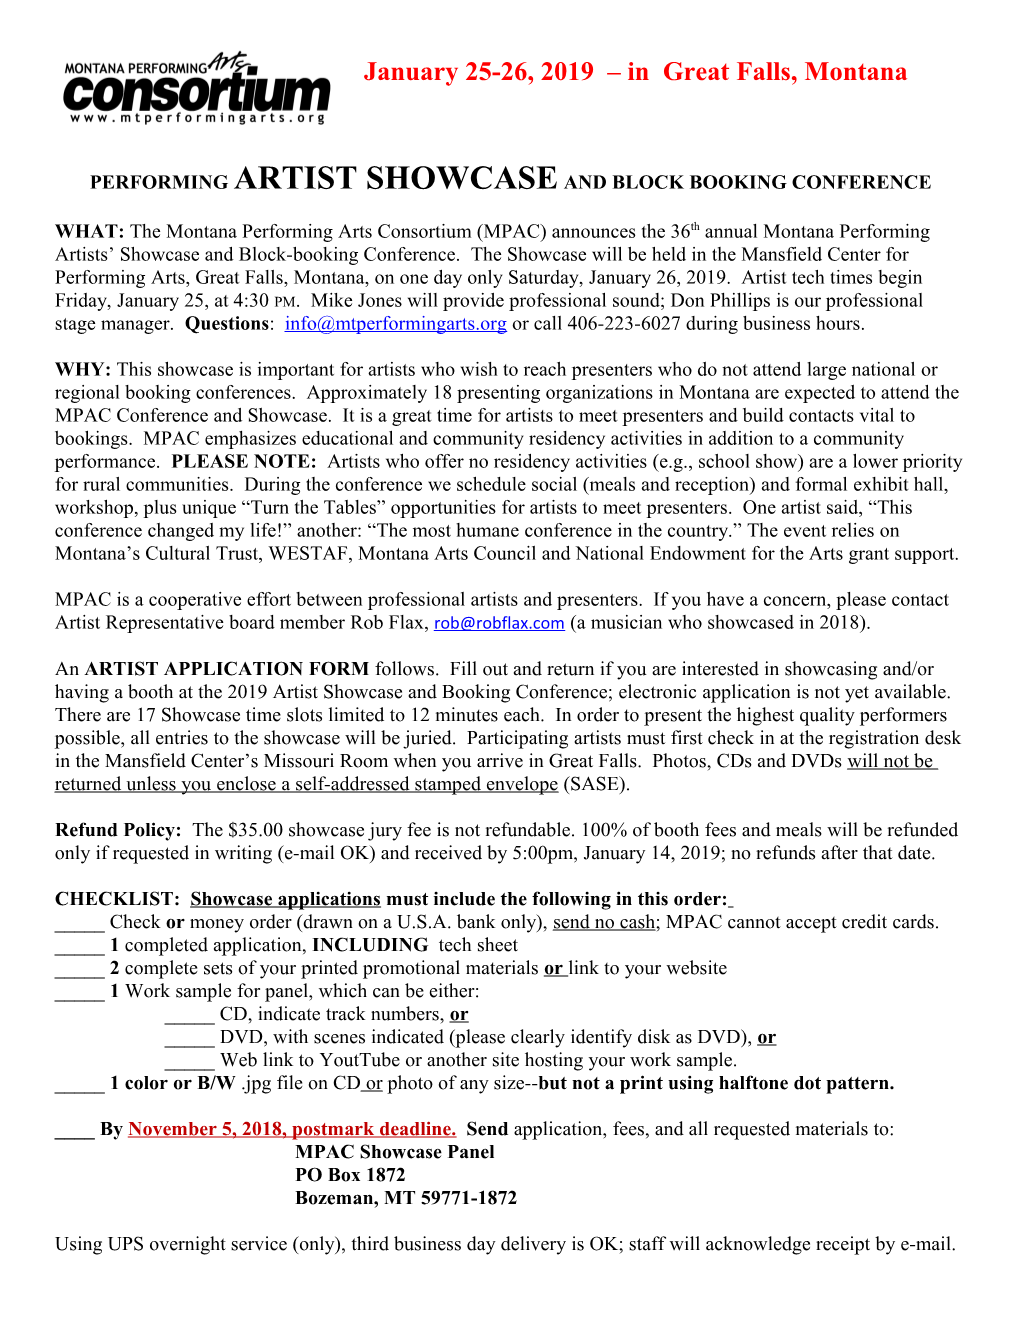 Performing Artists Showcase Application Guidelines